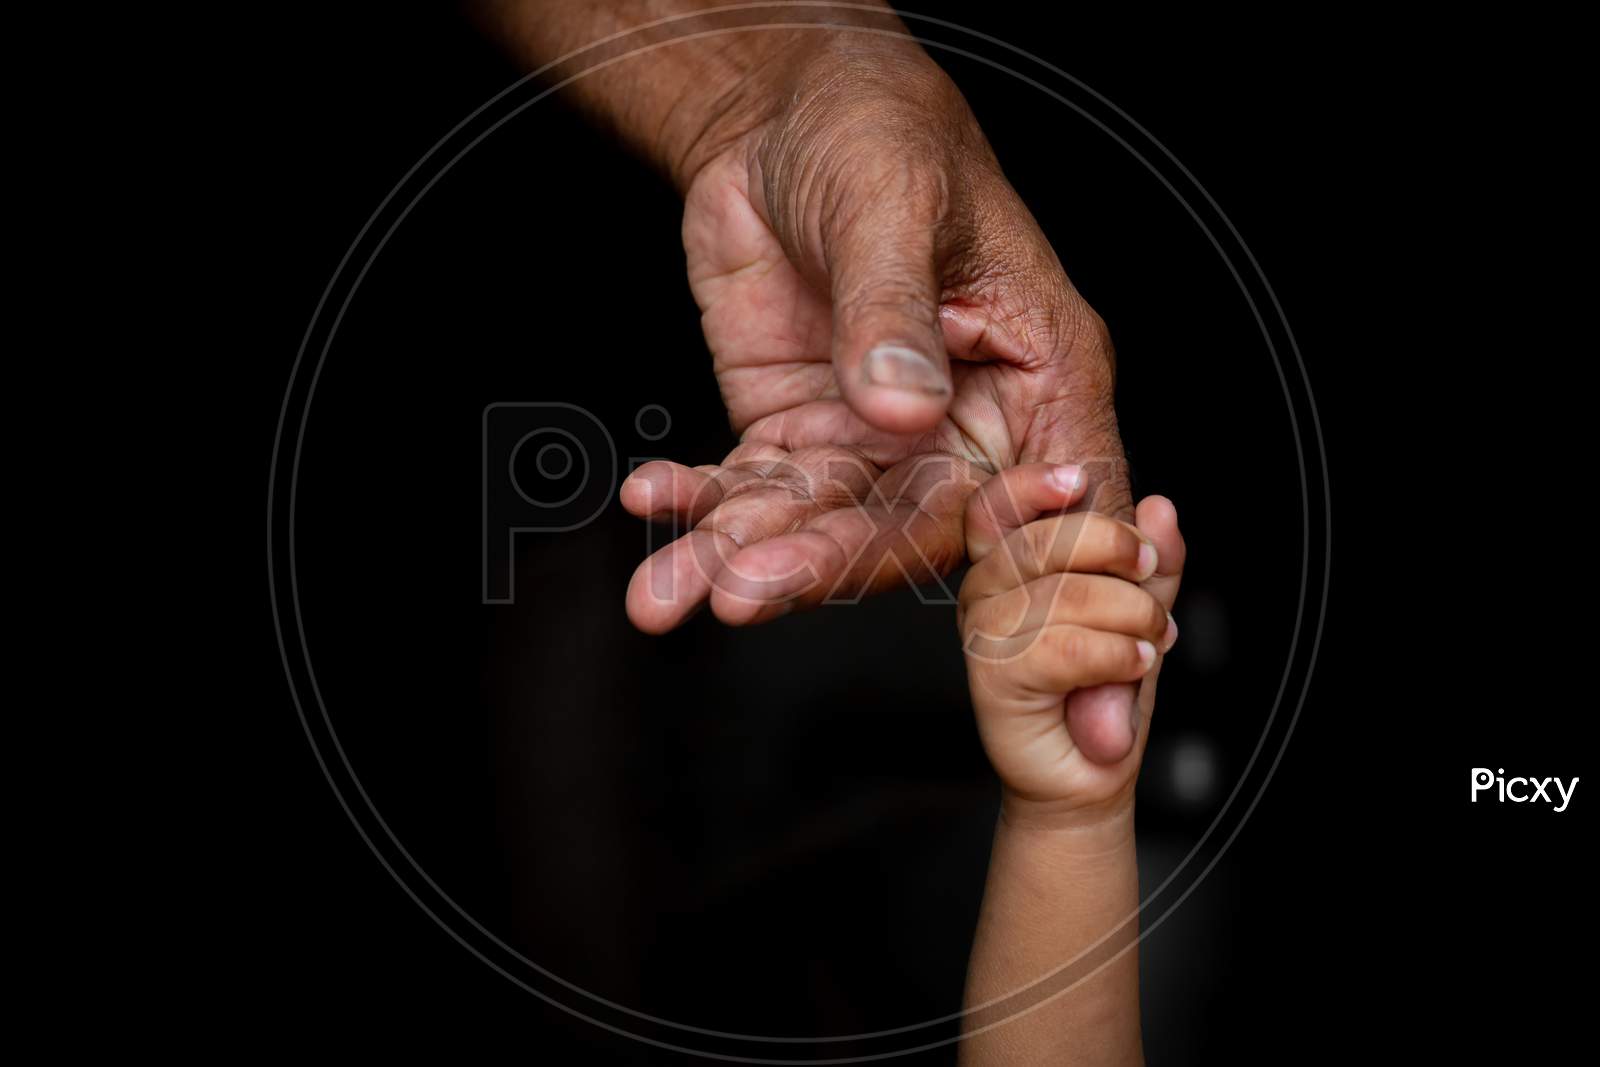 A Baby'S Hands Holding Tightly A Senior Man'S Old Age Finger. Family, Generation, Support And People Concept. Dark Background.